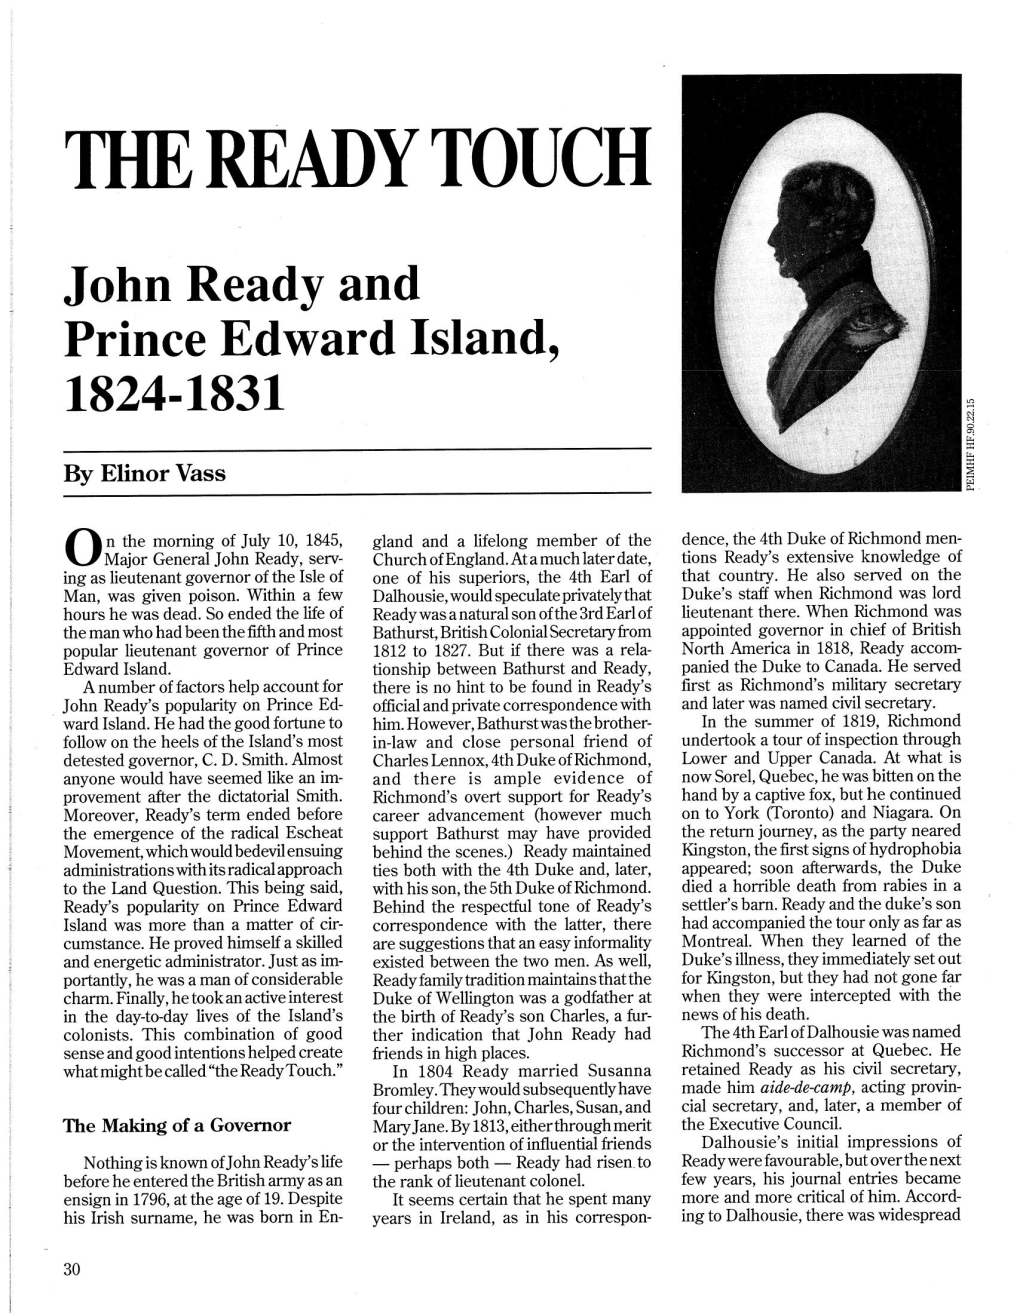 THE READY TOUCH John Ready and Prince Edward Island, 1824-1831